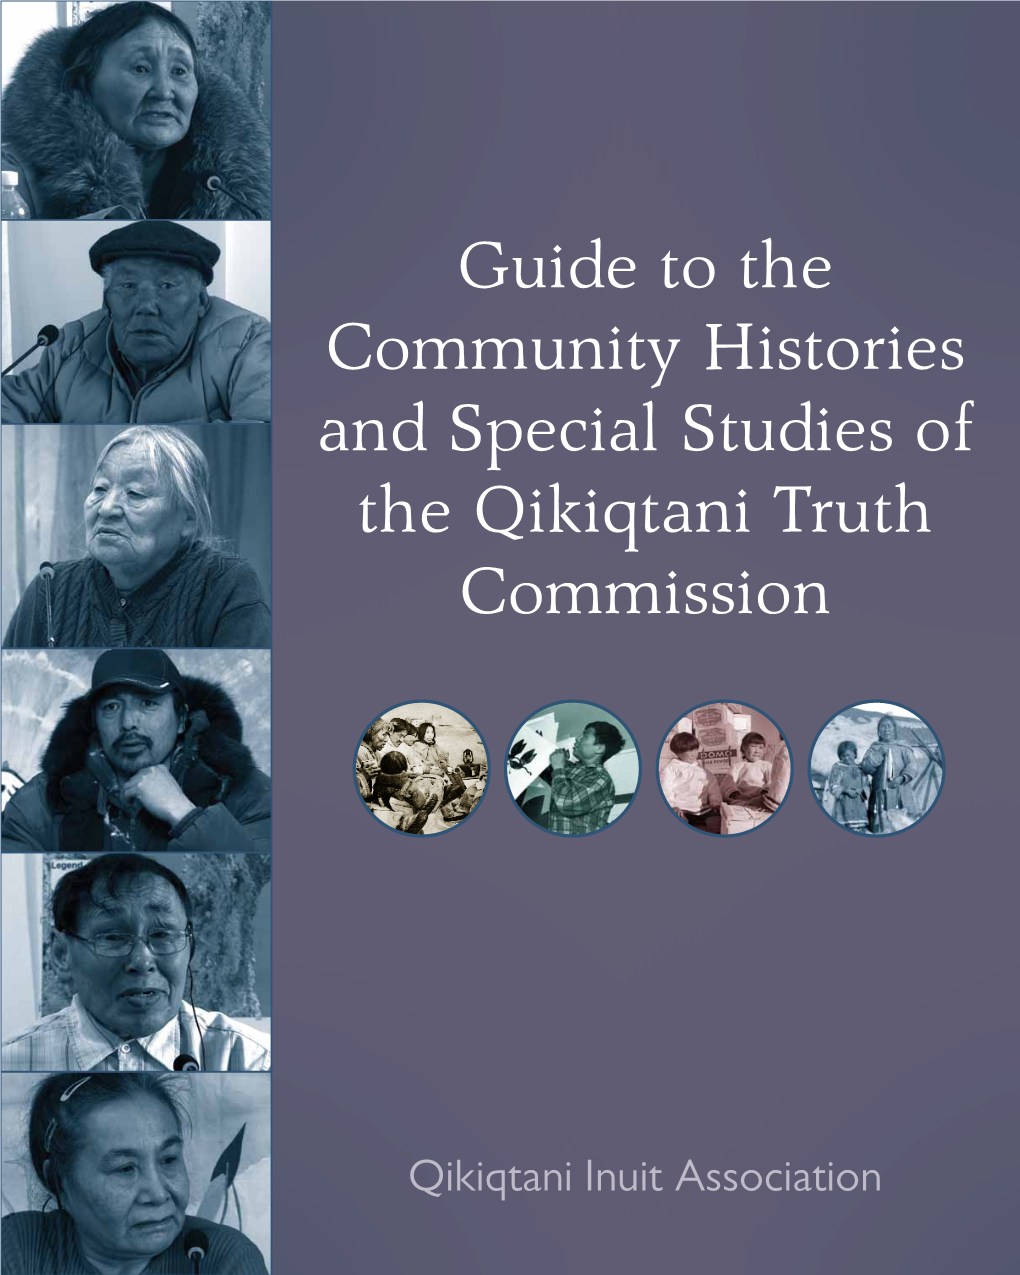 Guide to the Community Histories and Special Studies of the Qikiqtani Truth Commission